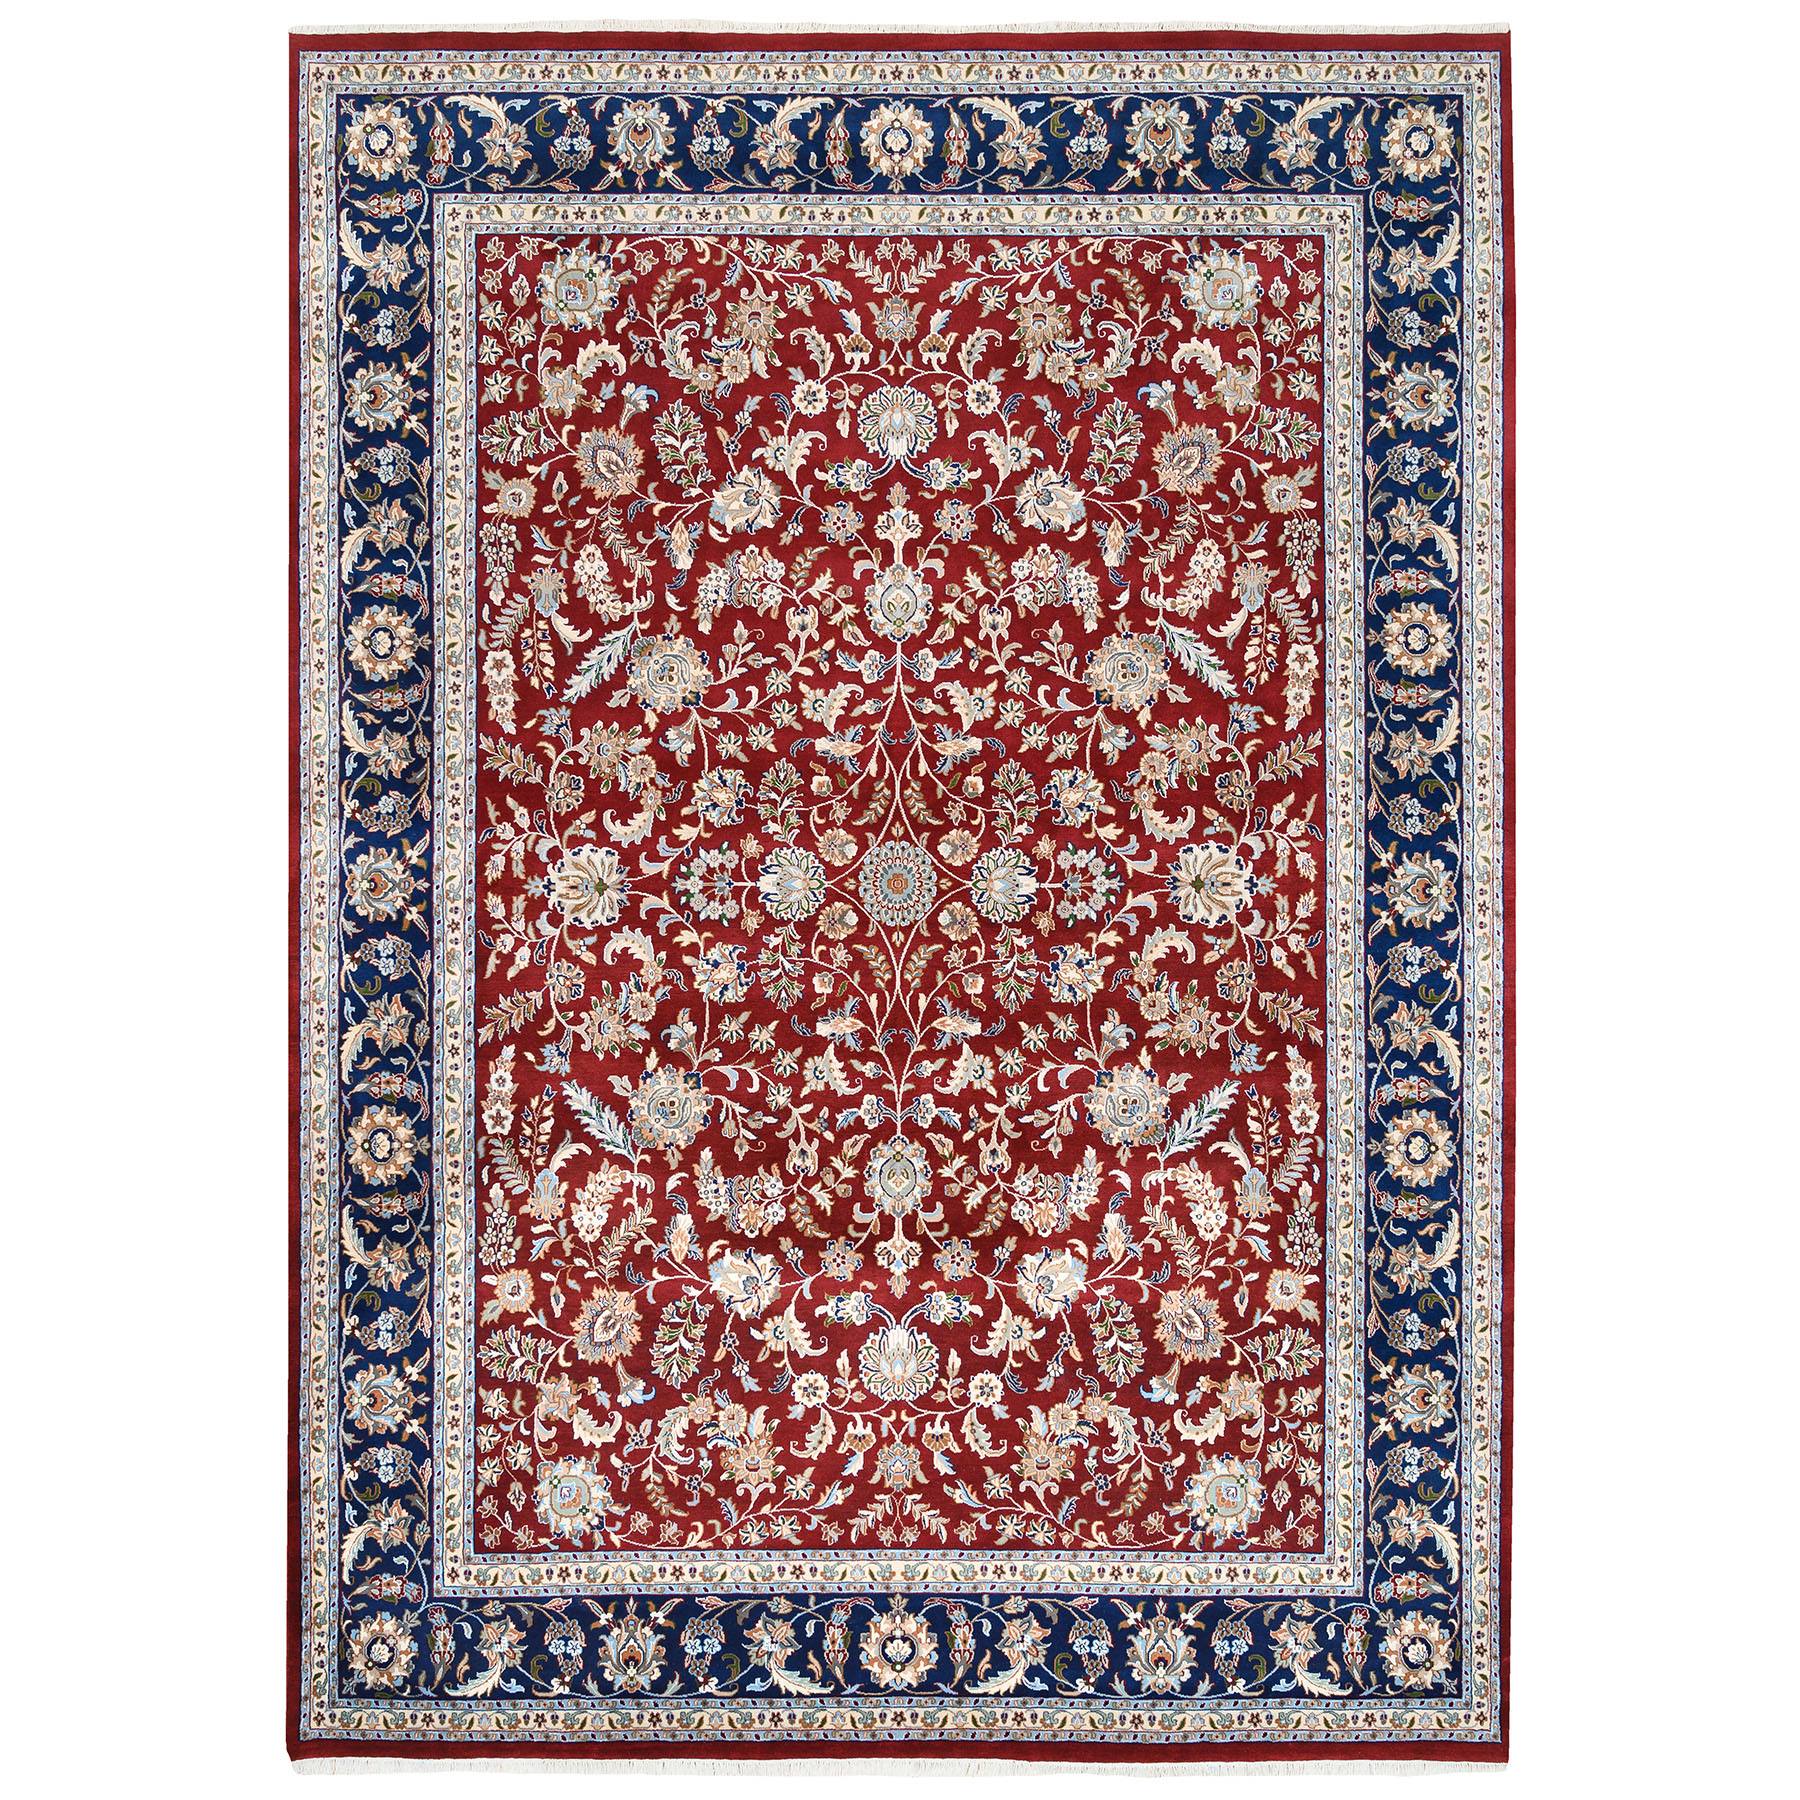 Pirniakan Collection Hand Knotted Red Rug No: 1126036